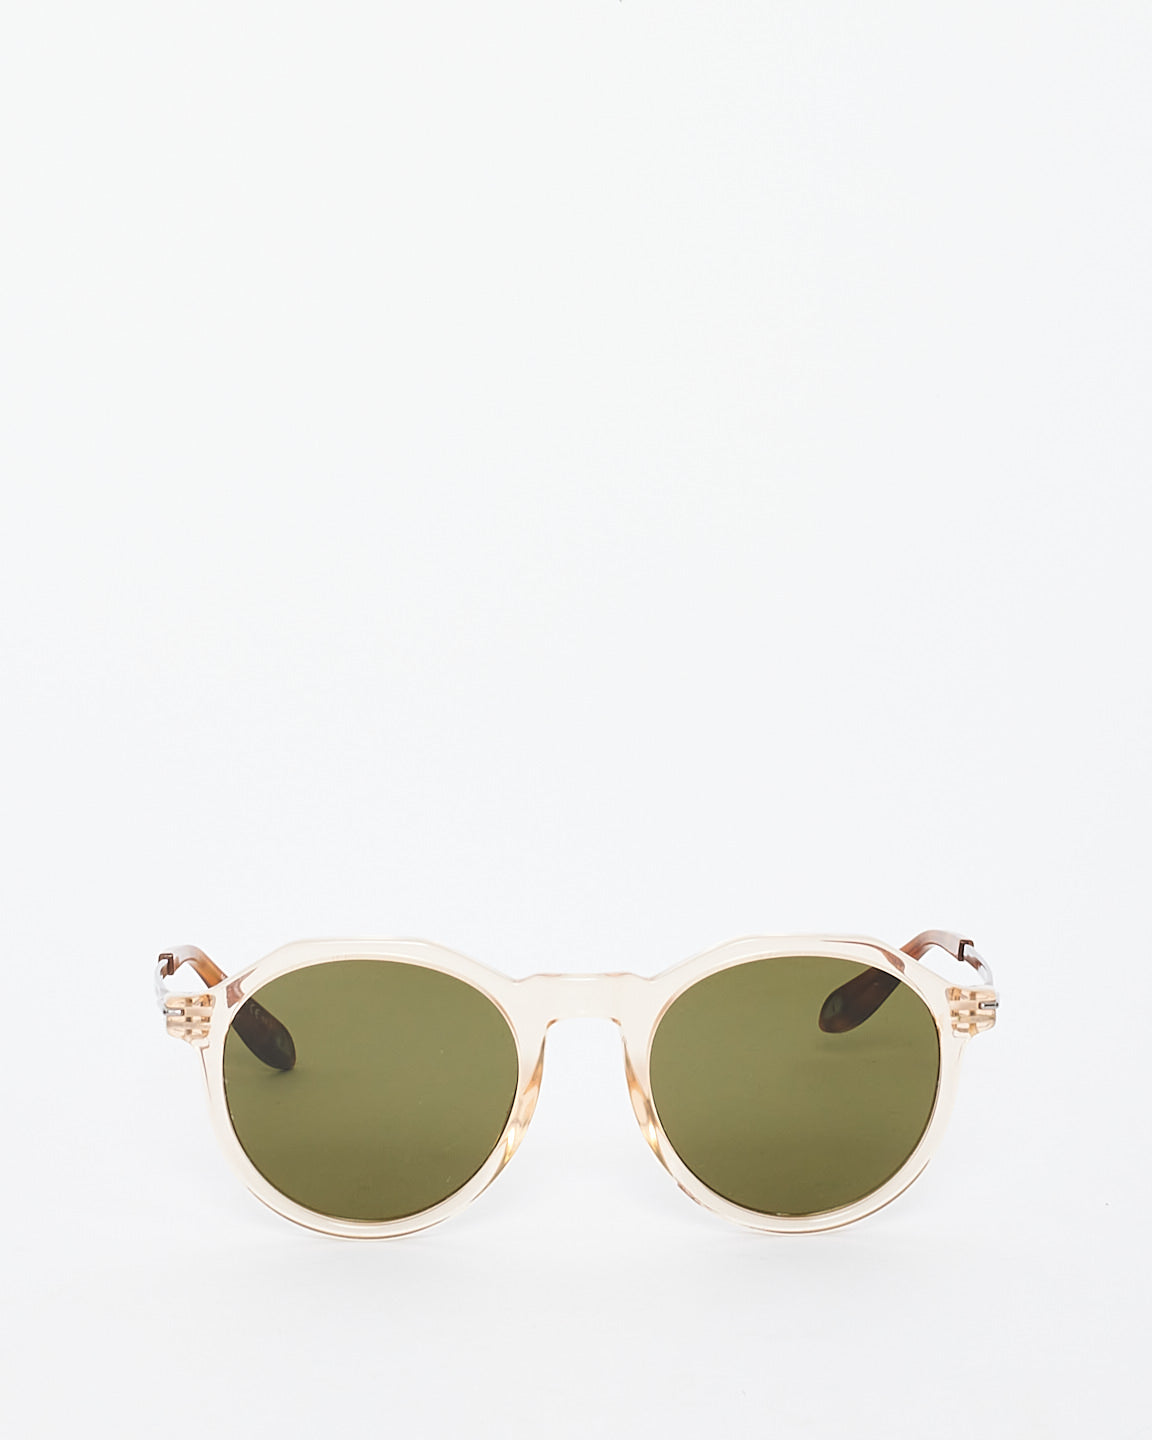 Givenchy Light Brown Acetate Rounded GV7091/S Sunglasses